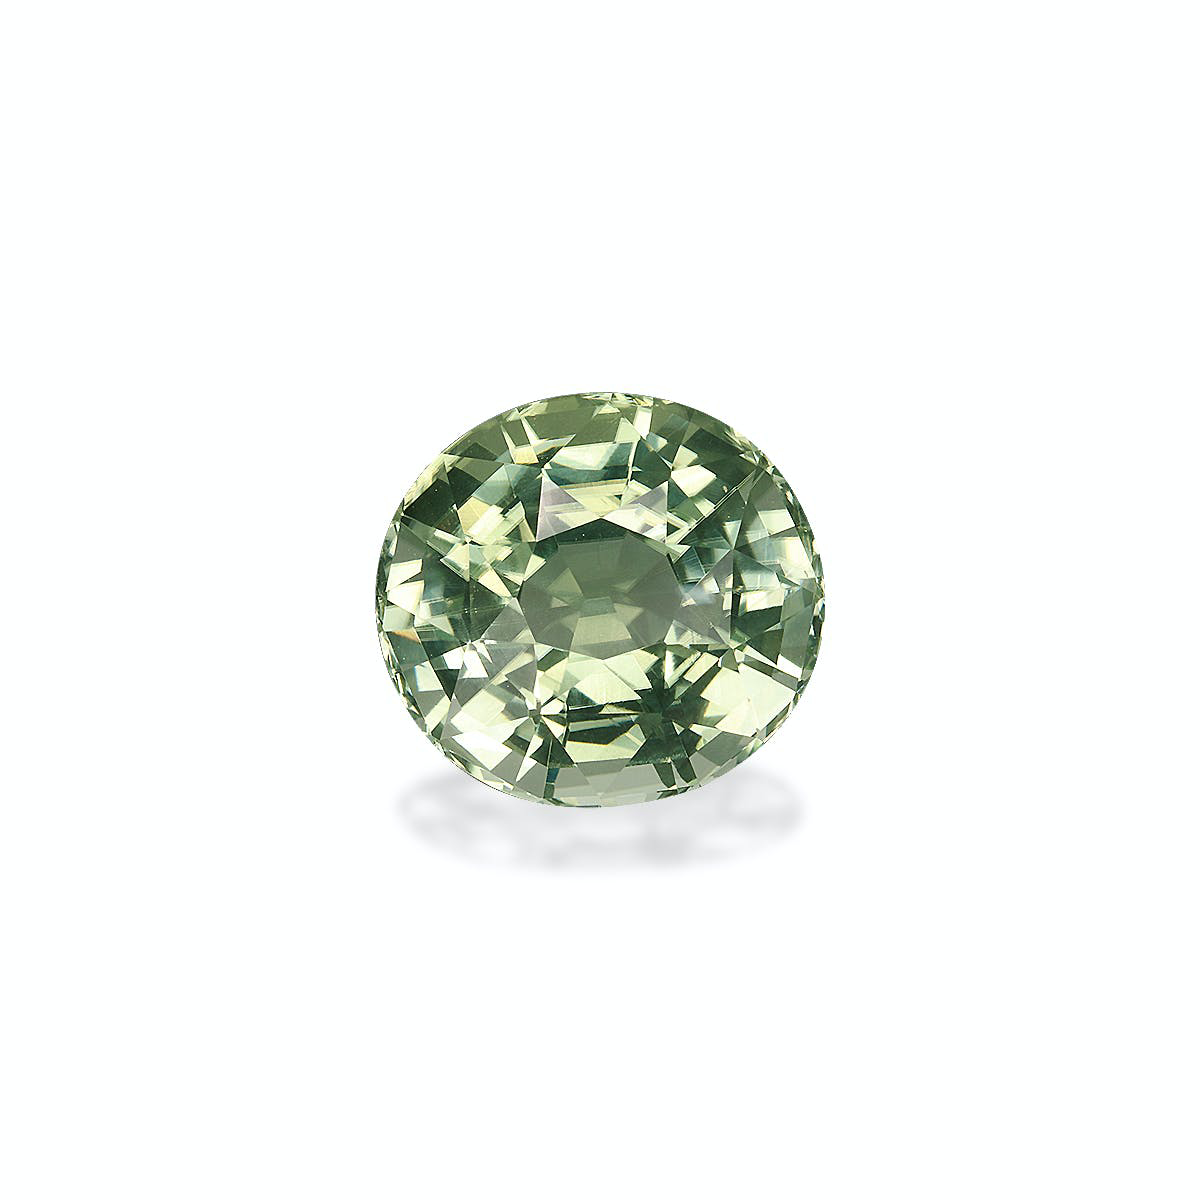 Picture of Pale Green Tourmaline 7.79ct (TG0704)